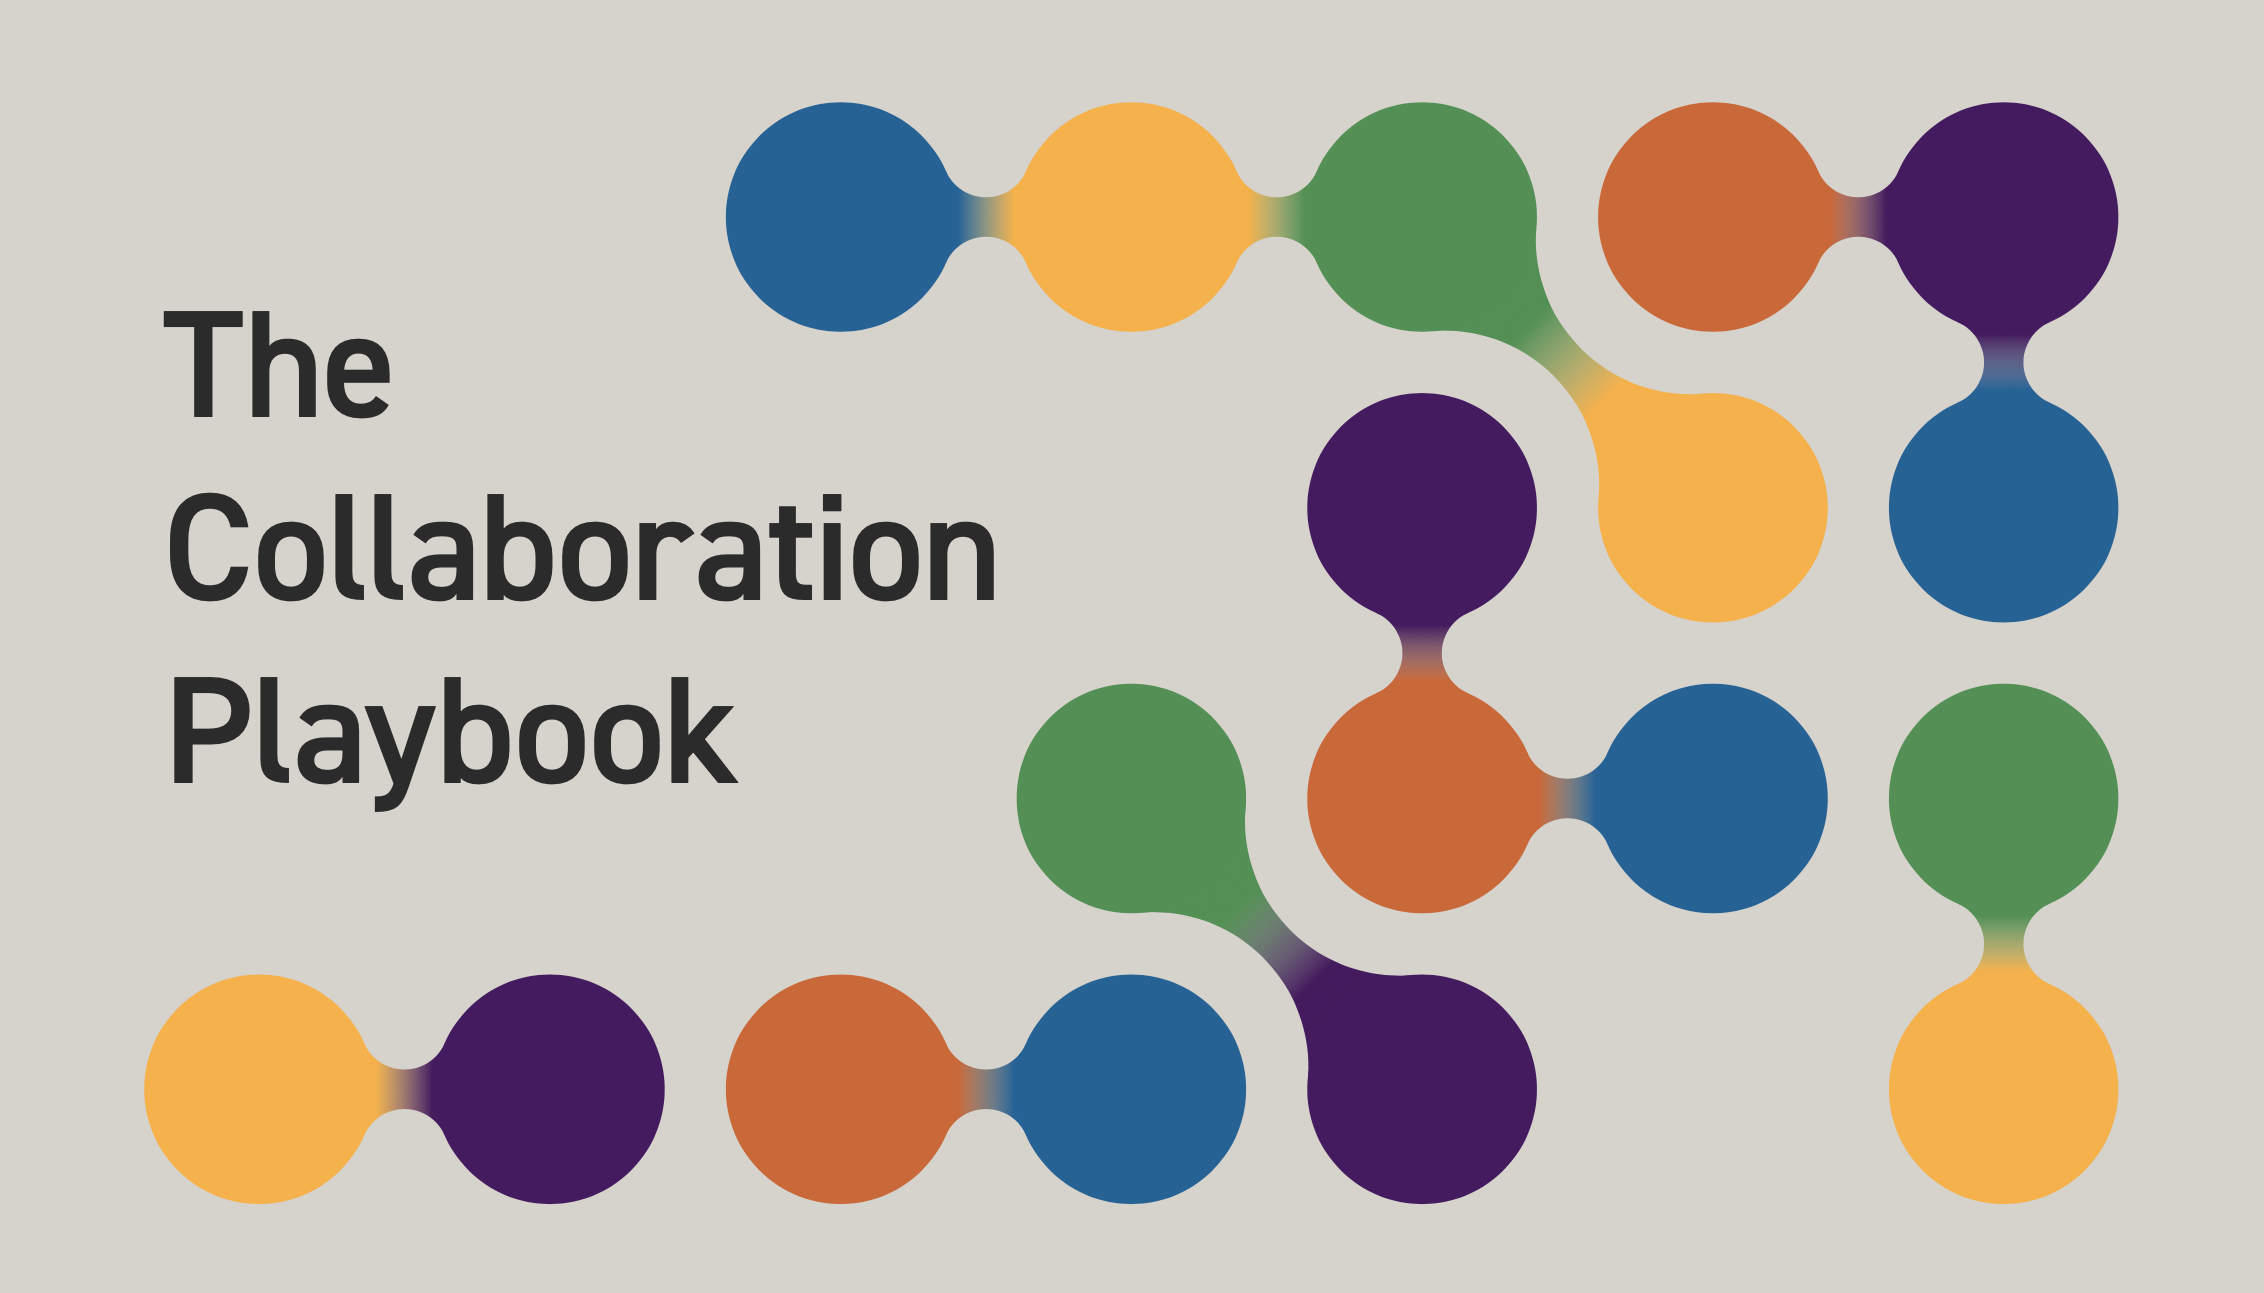 The Collaboration Playbook